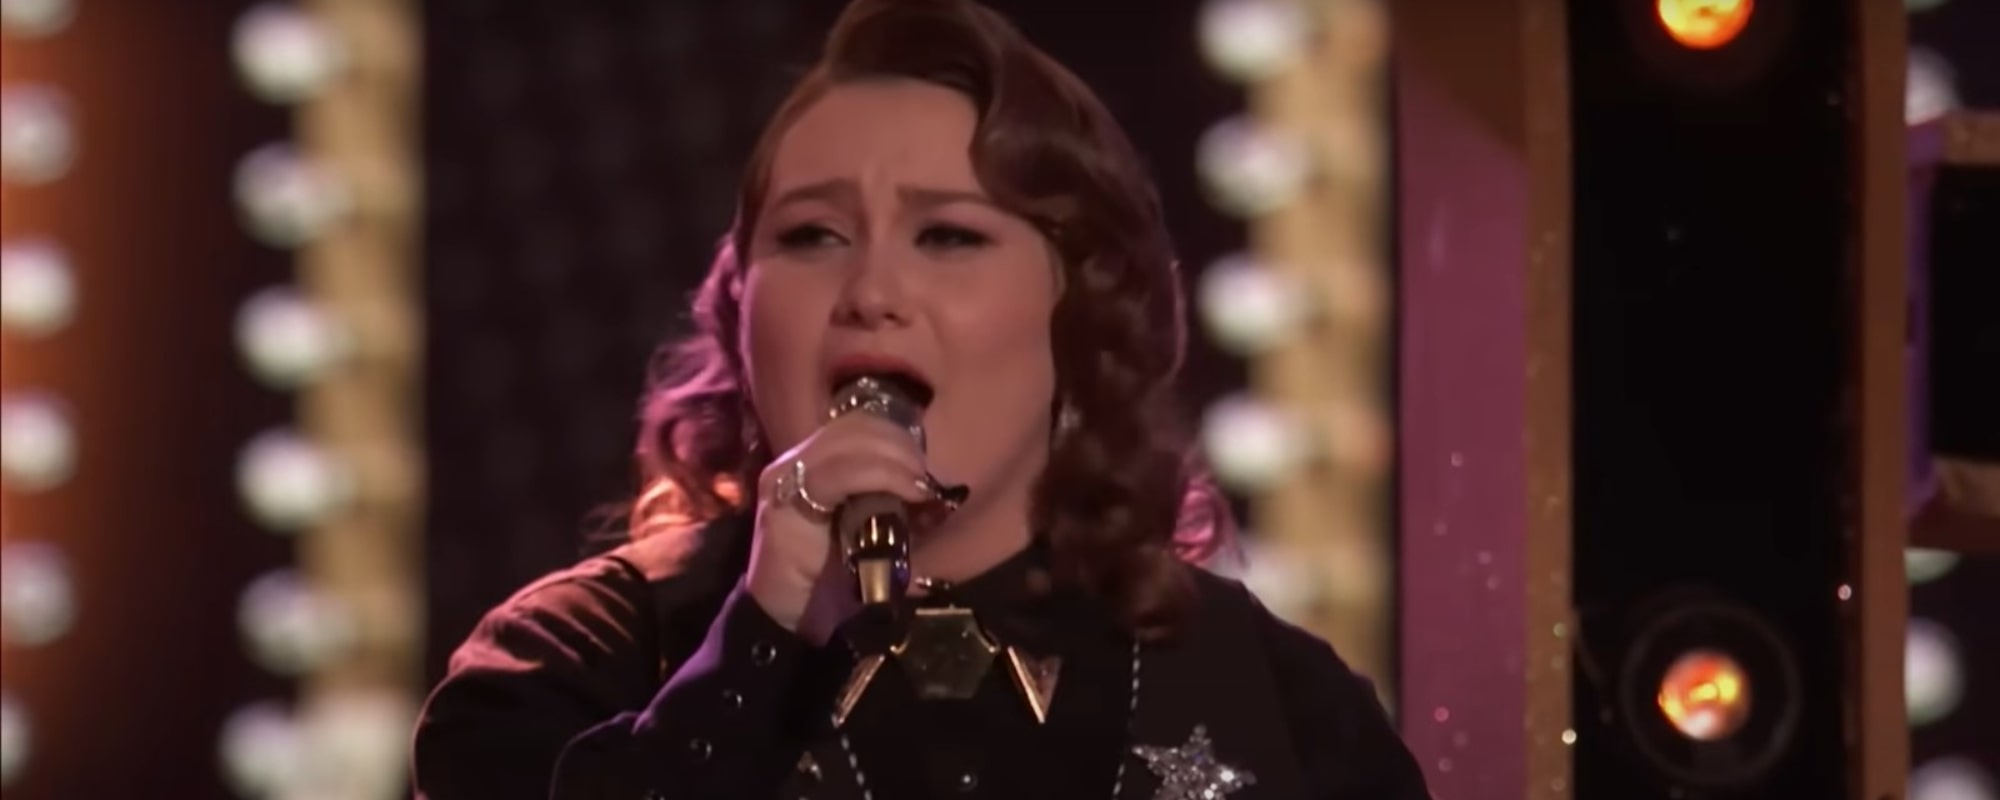 New Fan Video Shows the True Character of ‘The Voice’ Runner-up Ruby Leigh